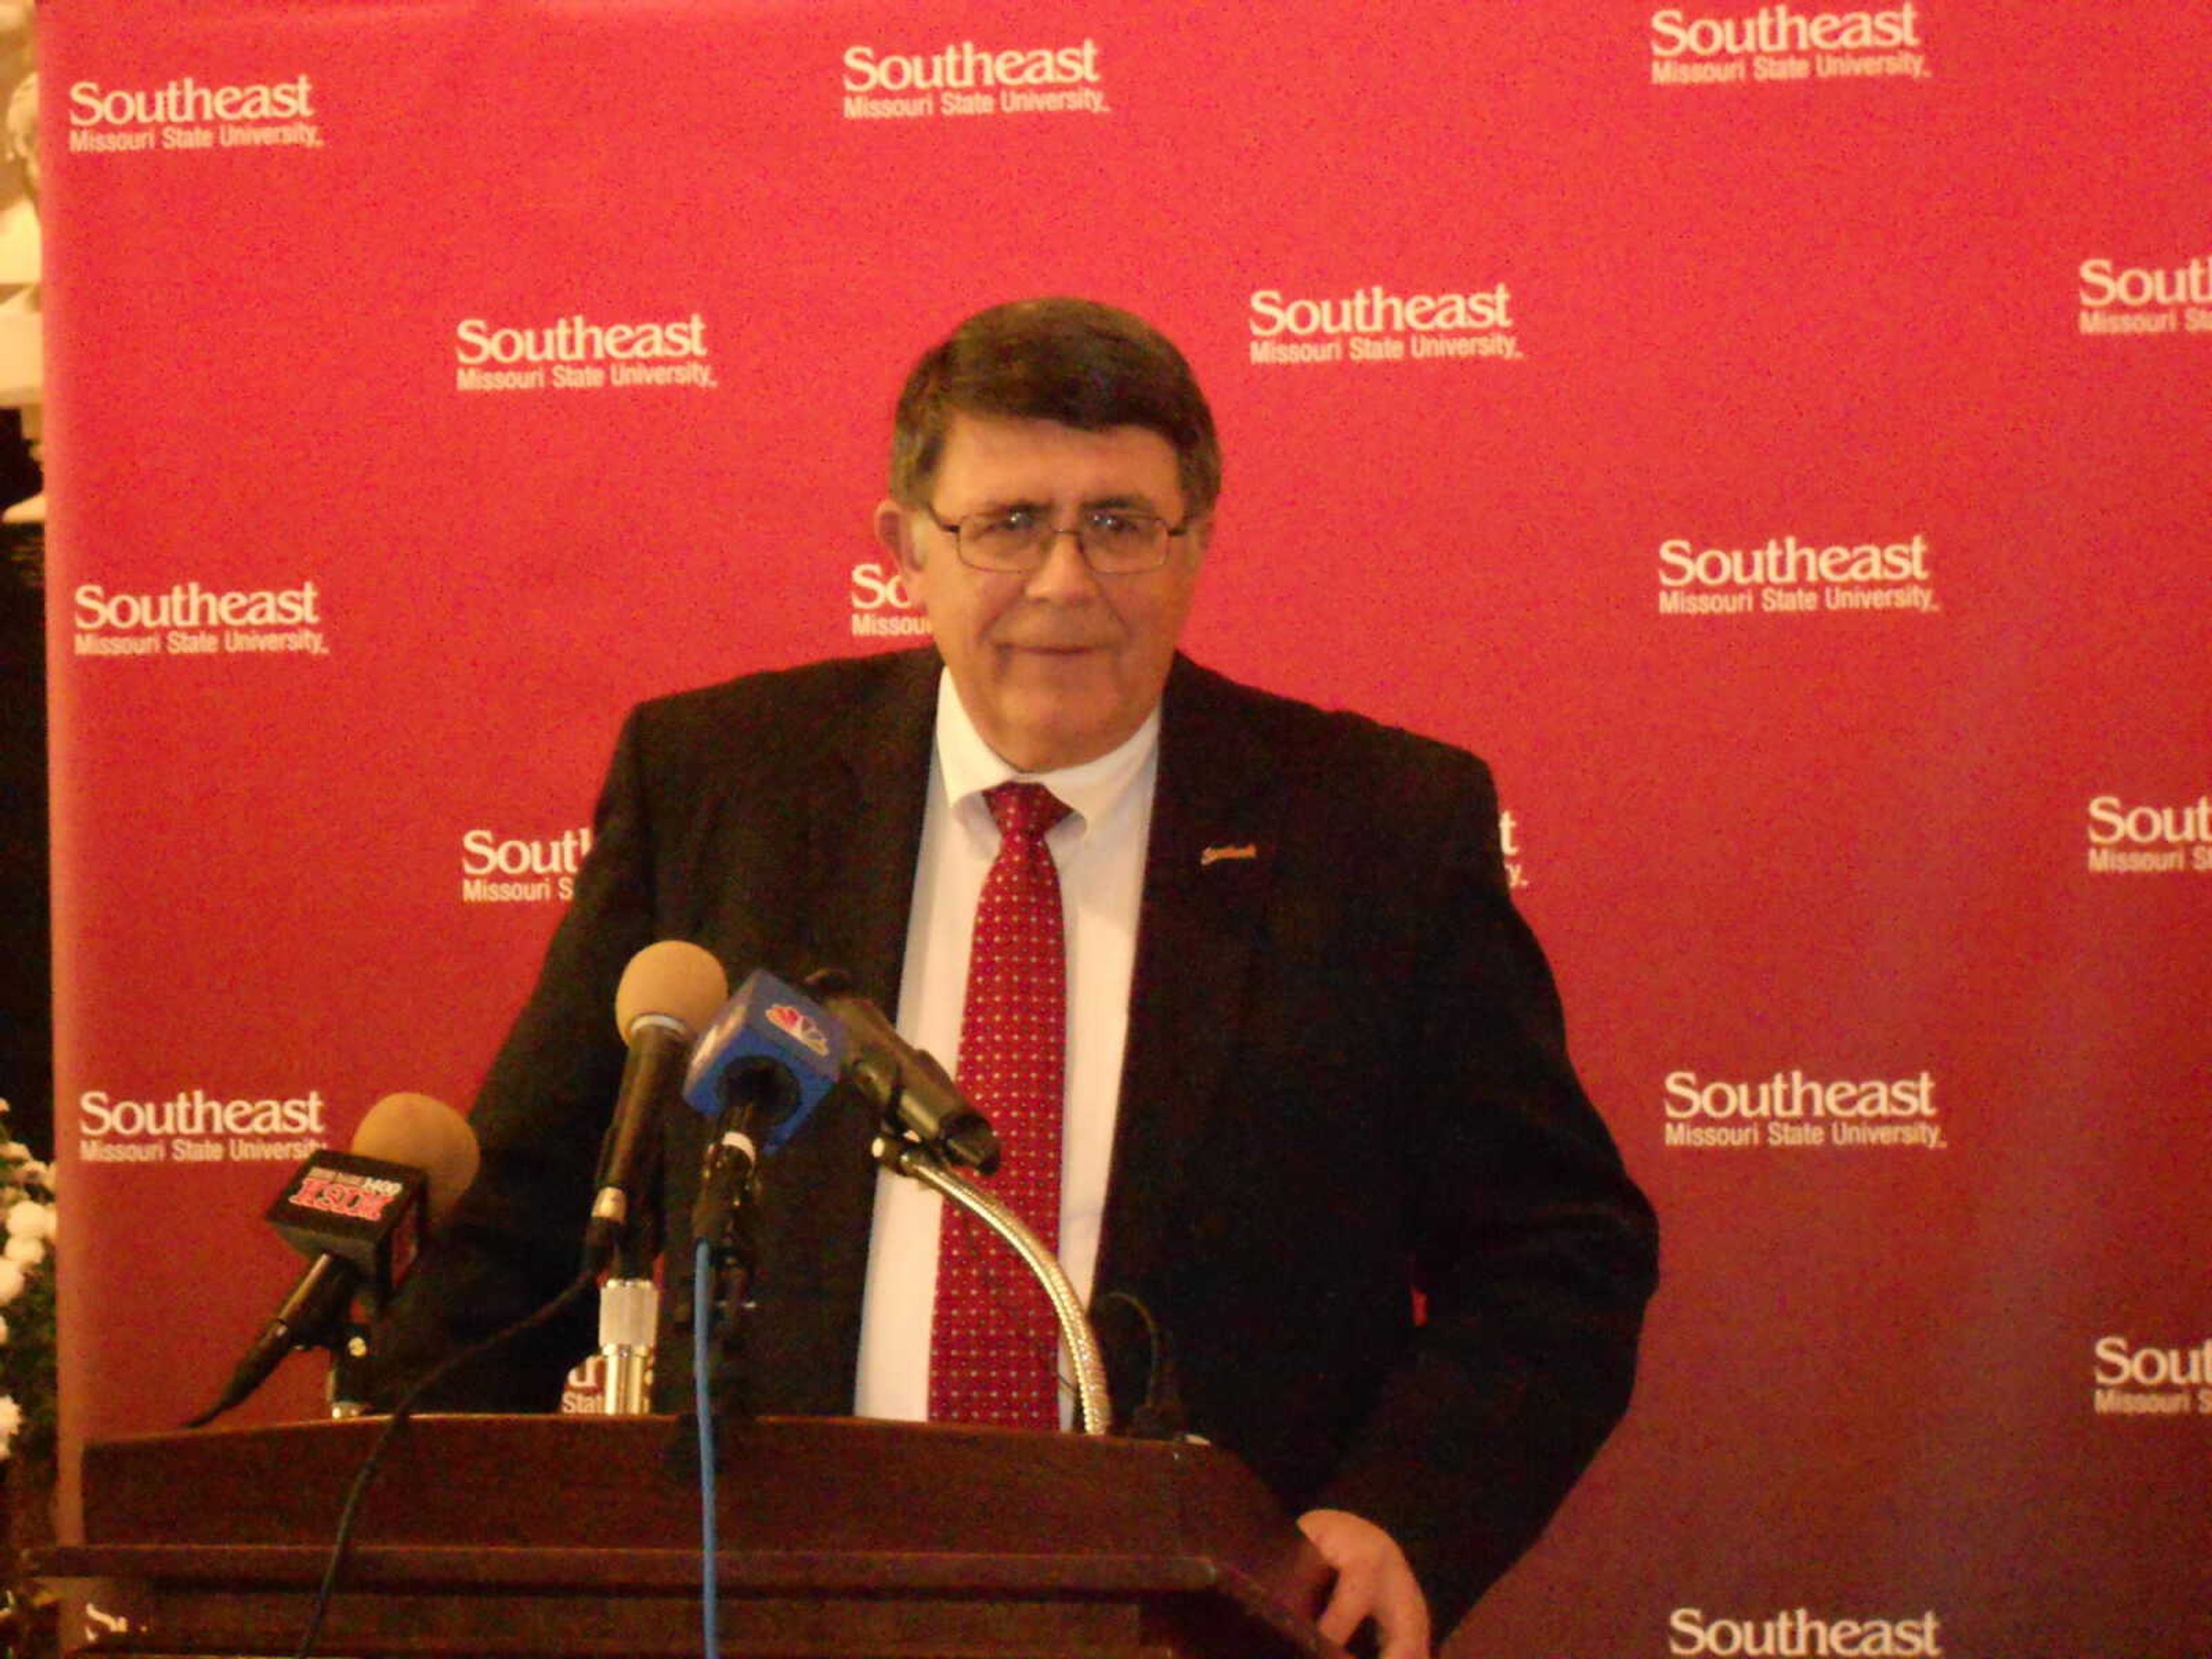 Southeast President Dr. Kenneth W. Dobbins speaks at press conference Thursday. - Photo by Travis Wibbenmeyer